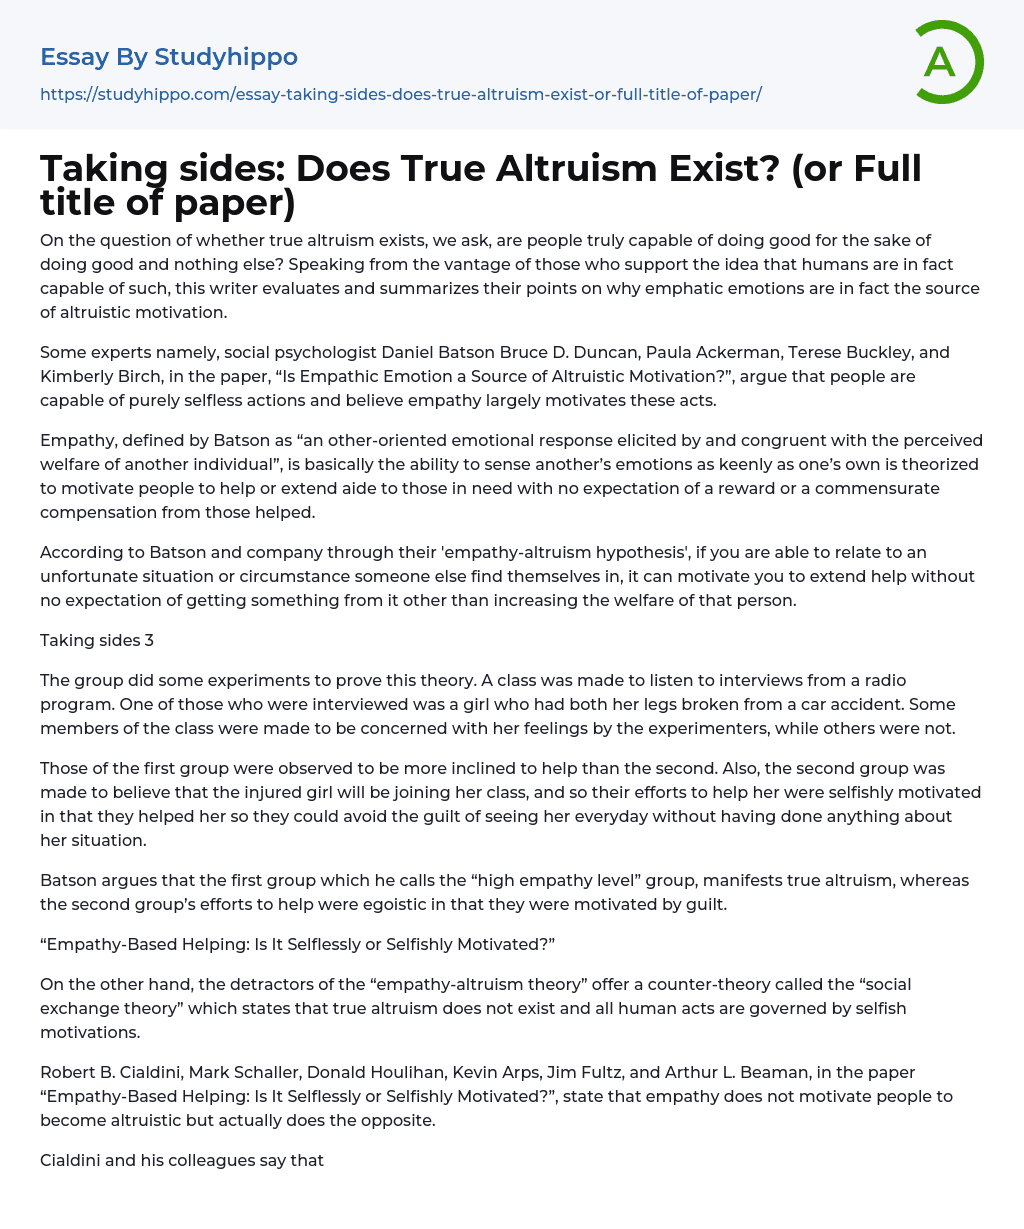 Taking sides: Does True Altruism Exist? (or Full title of paper) Essay Example